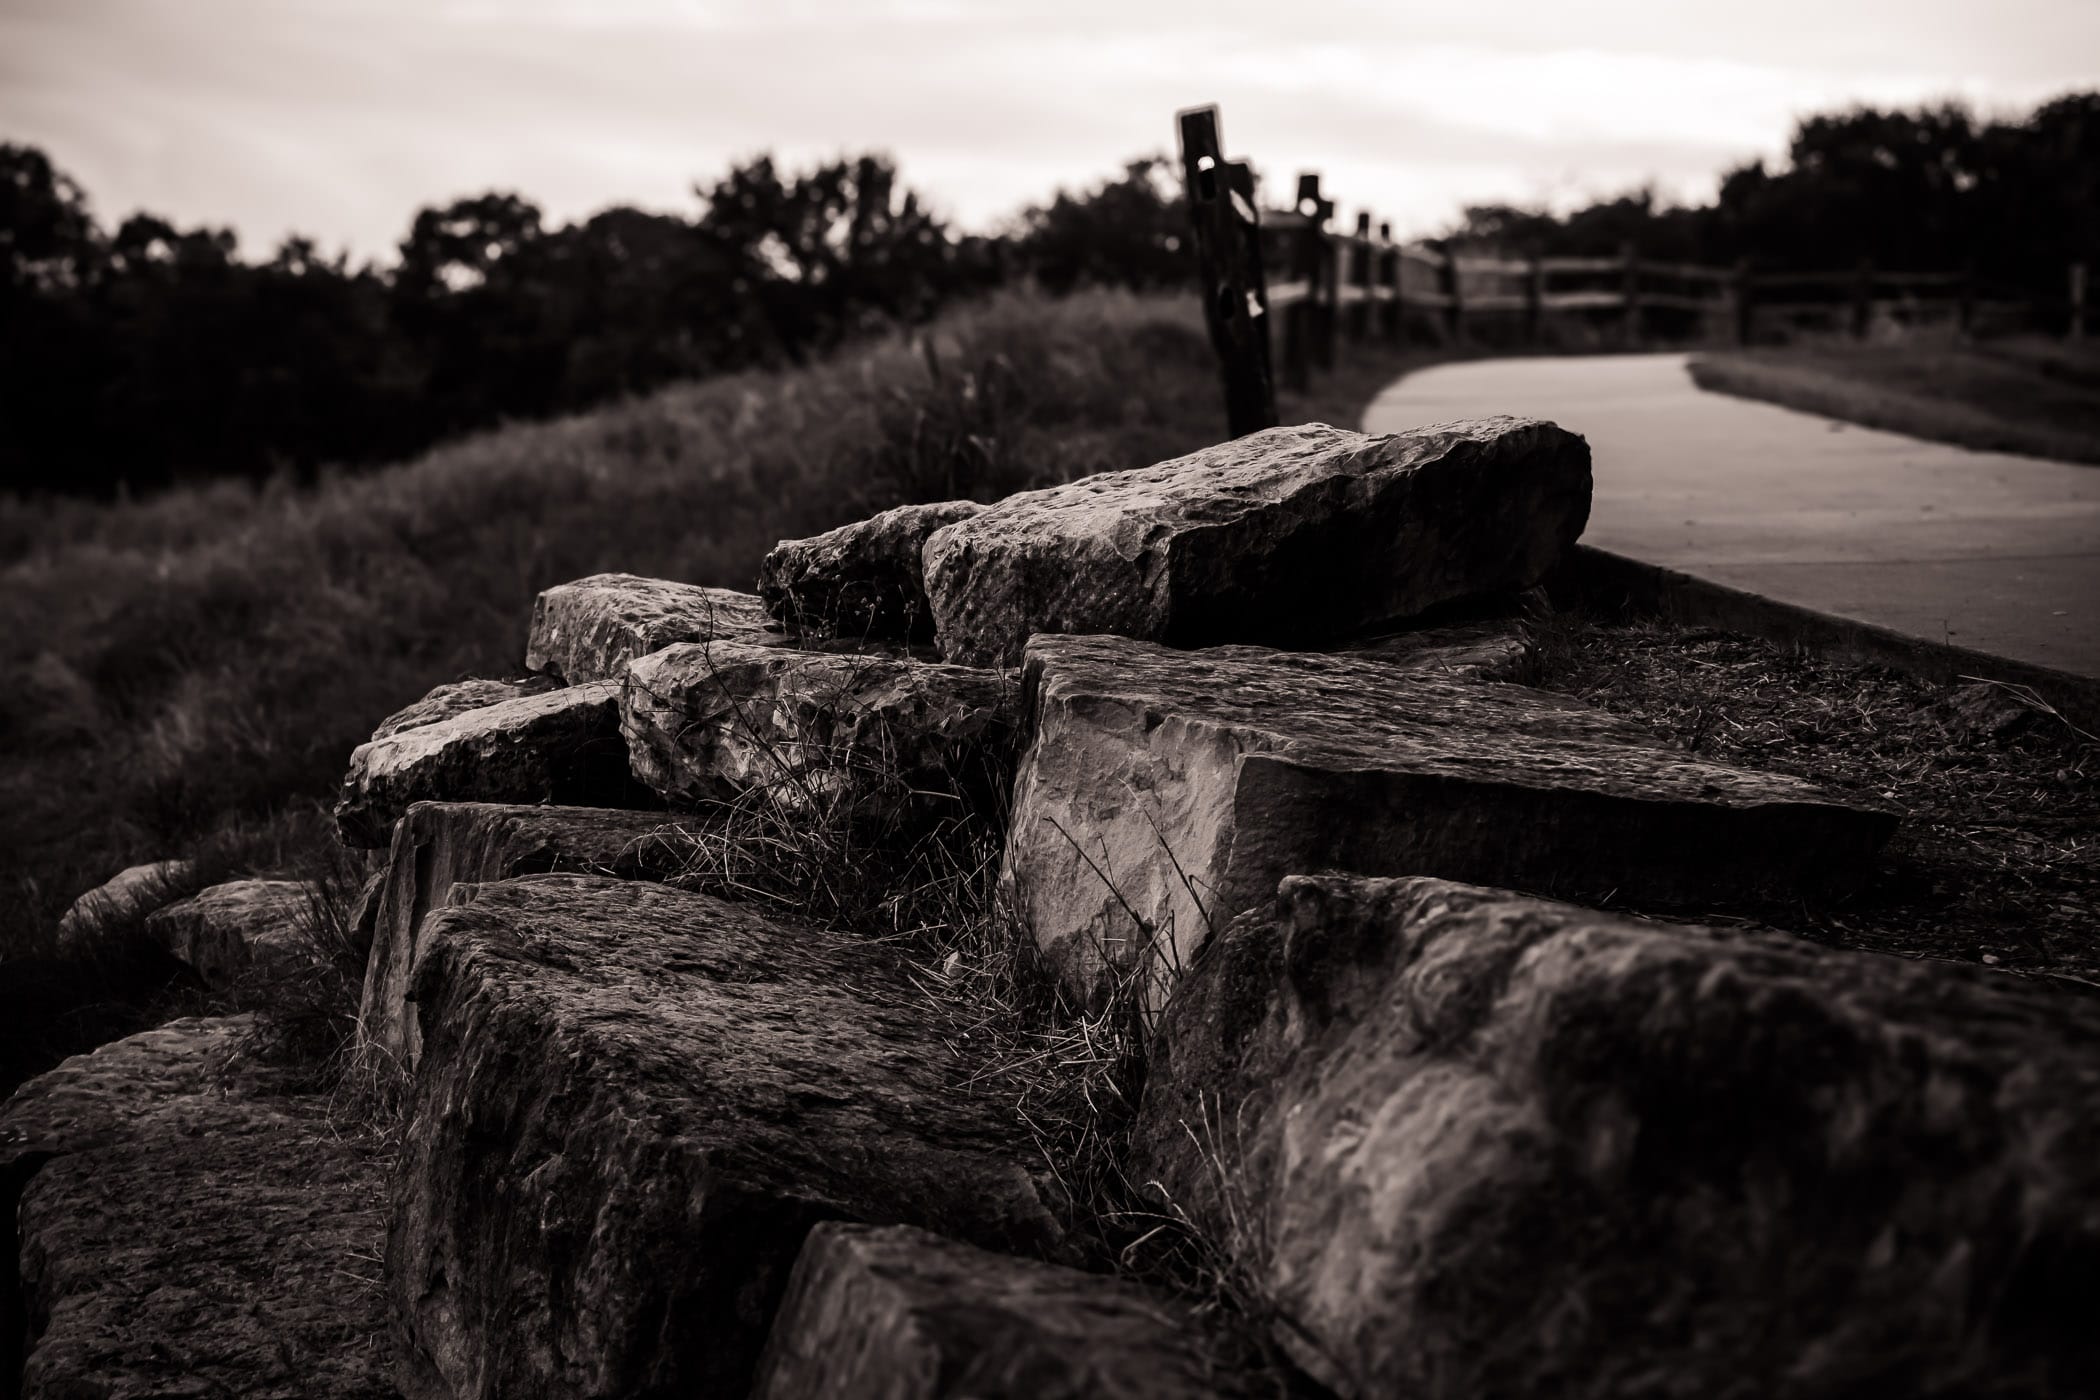 Rocks along a path at the Arbor Hills Nature Preserve in Plano, Texas.